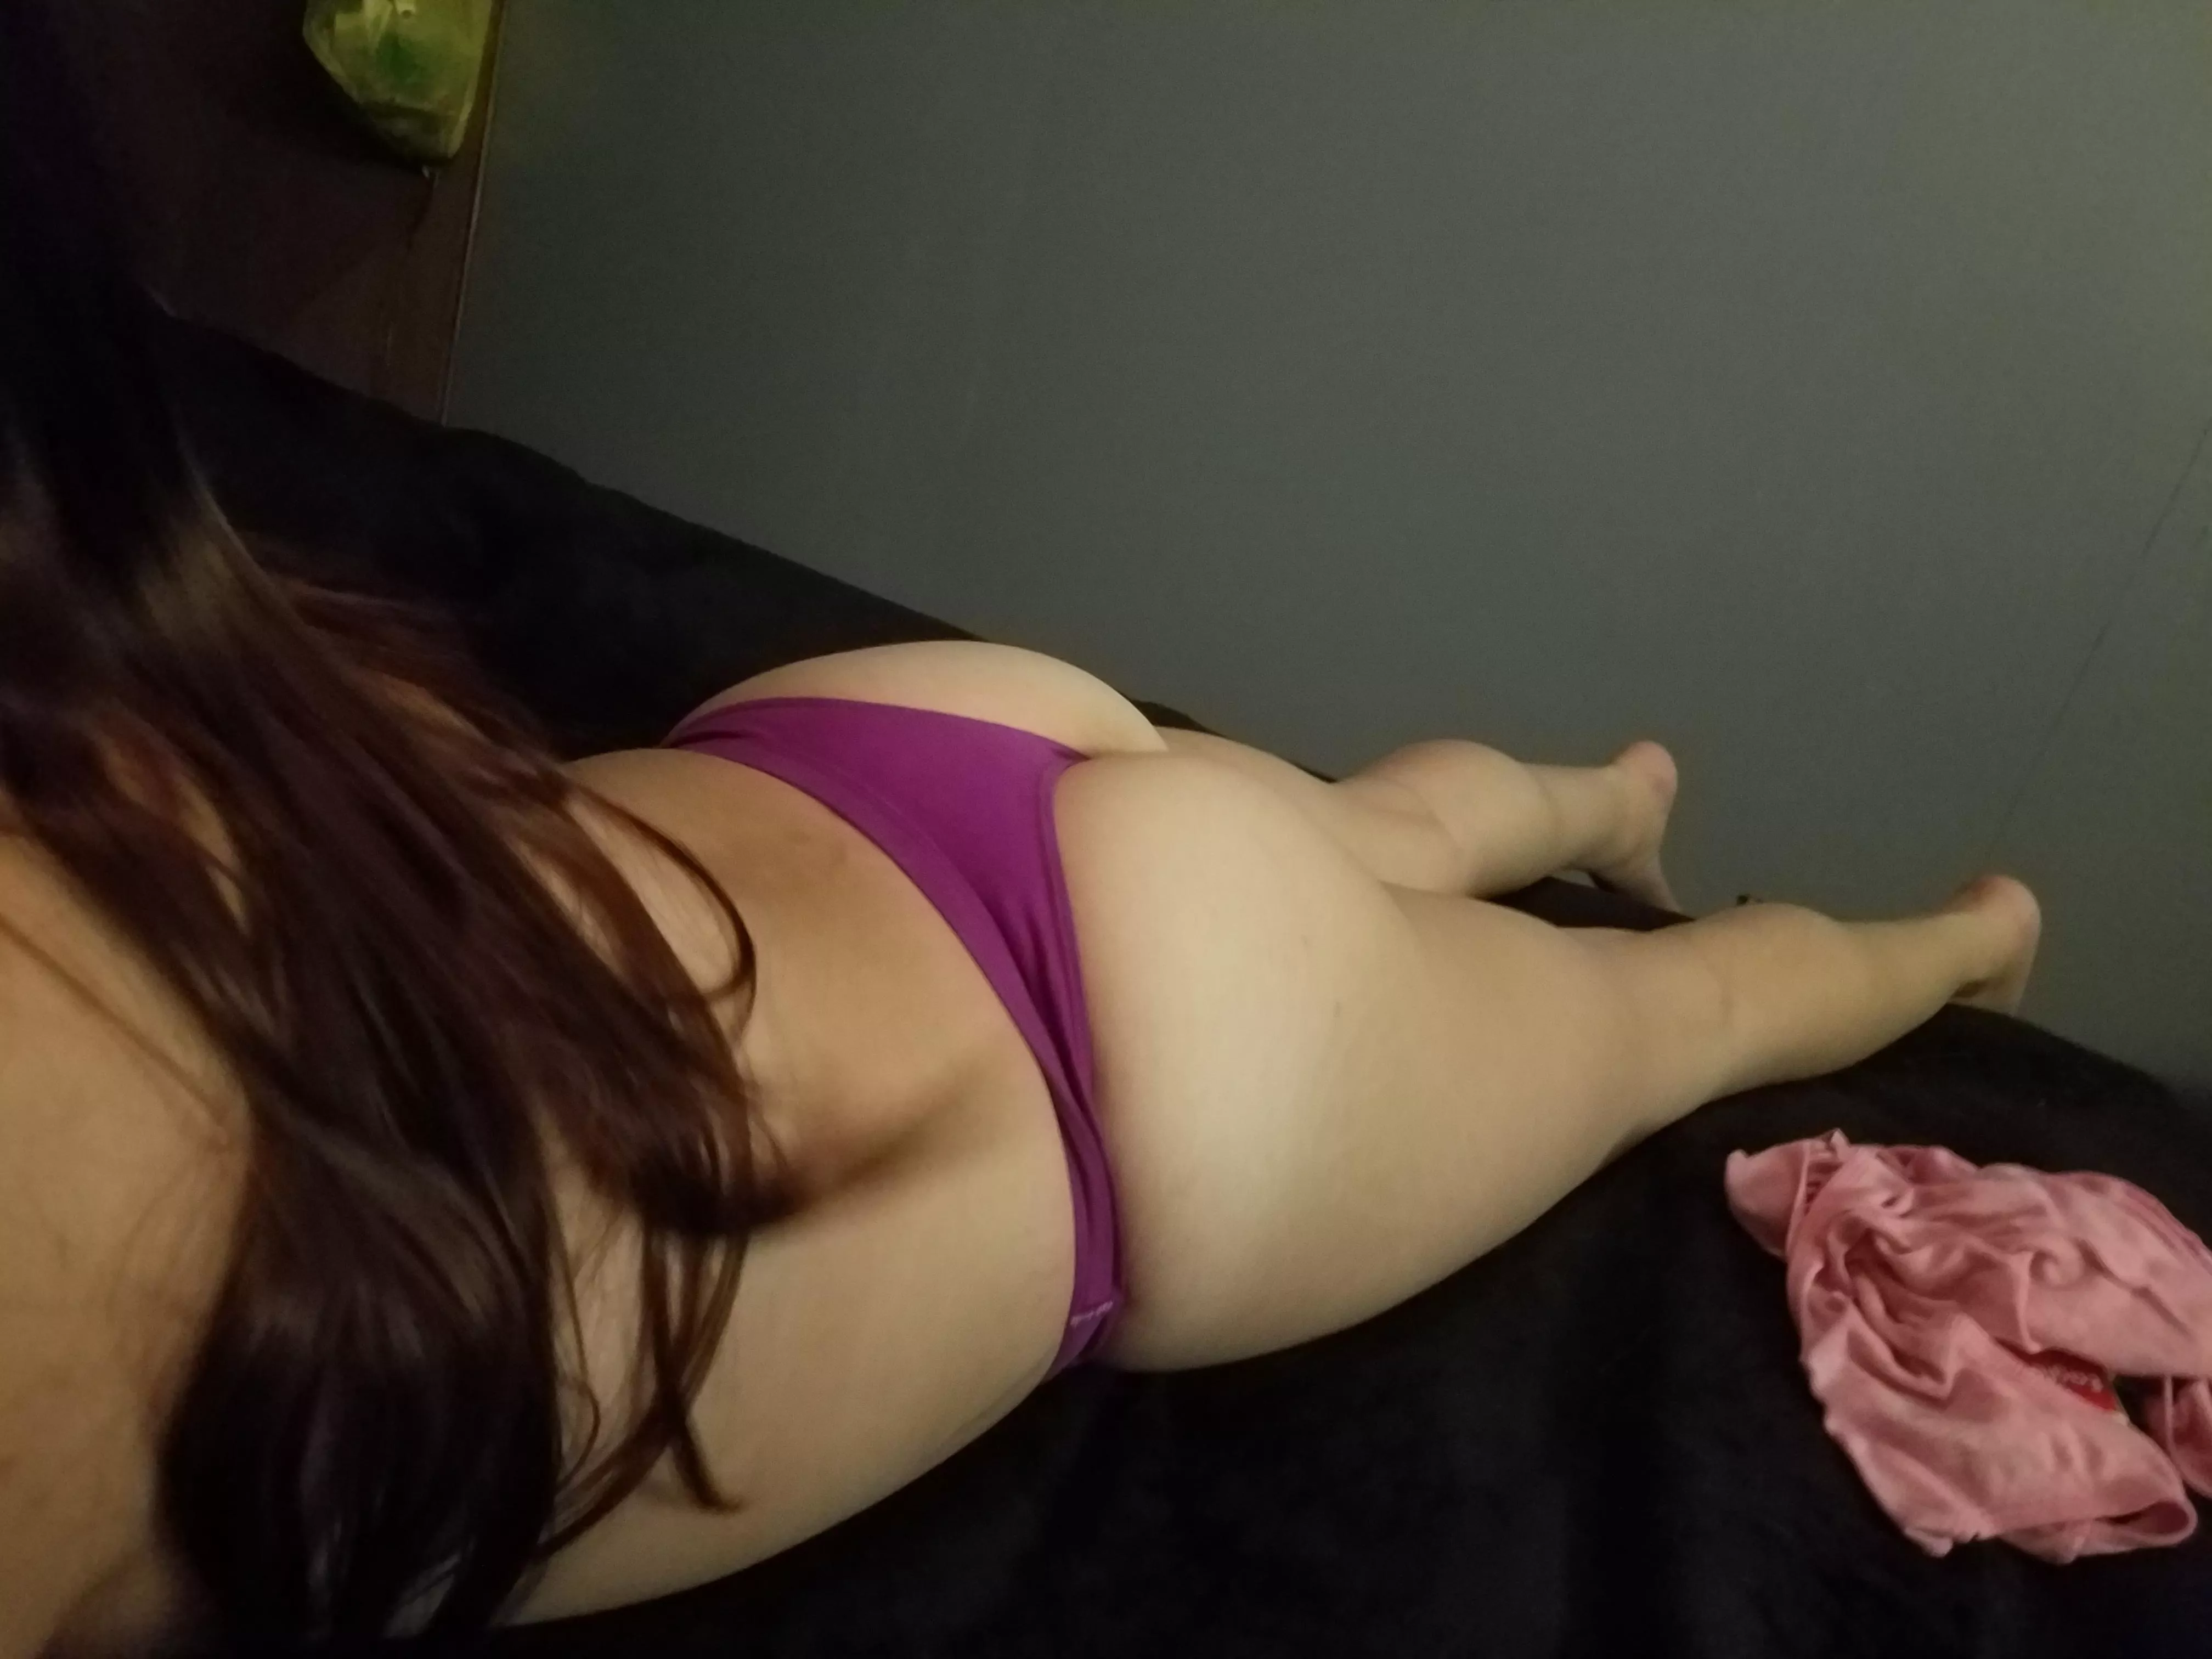 Trading my sexy 24 yo wife pics and videos on nudes in wifepictrading Onlynudes photo